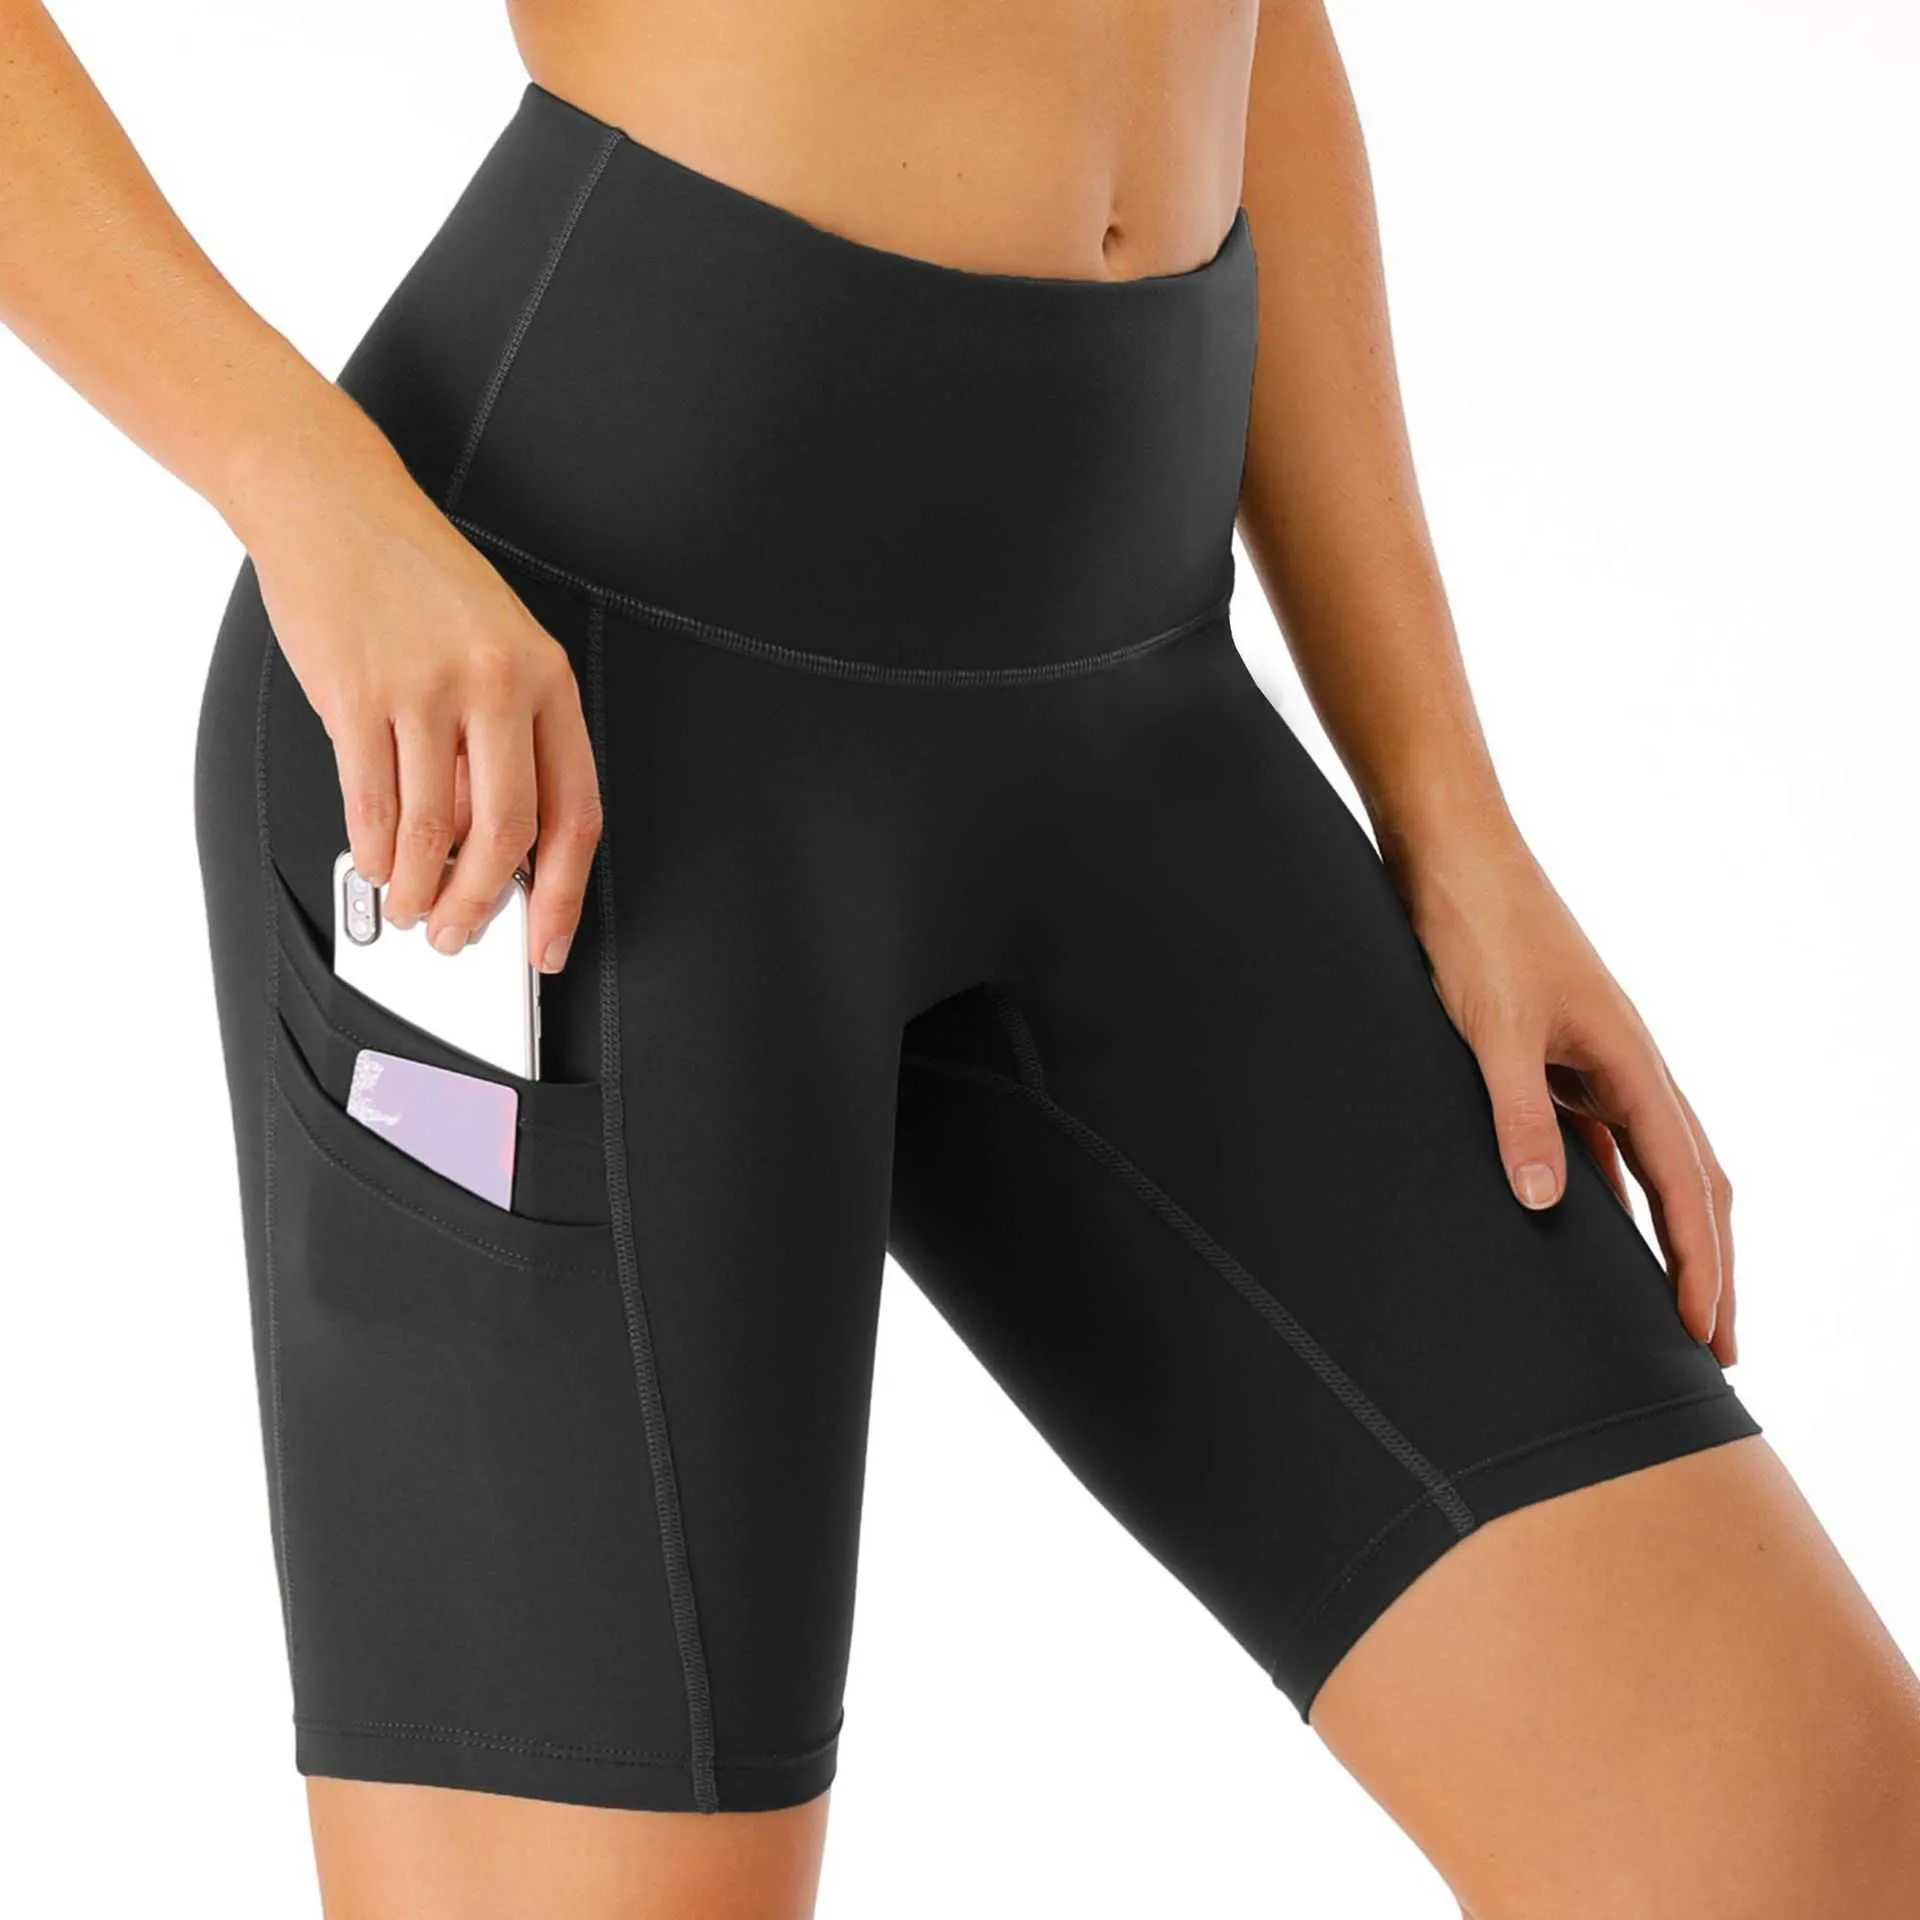 CapsA Tummy Control High Waist Short Leggings with Pockets for Women Workout Out Pocket Leggings Fitness Sports Gym Running Yoga Athletic Pants 